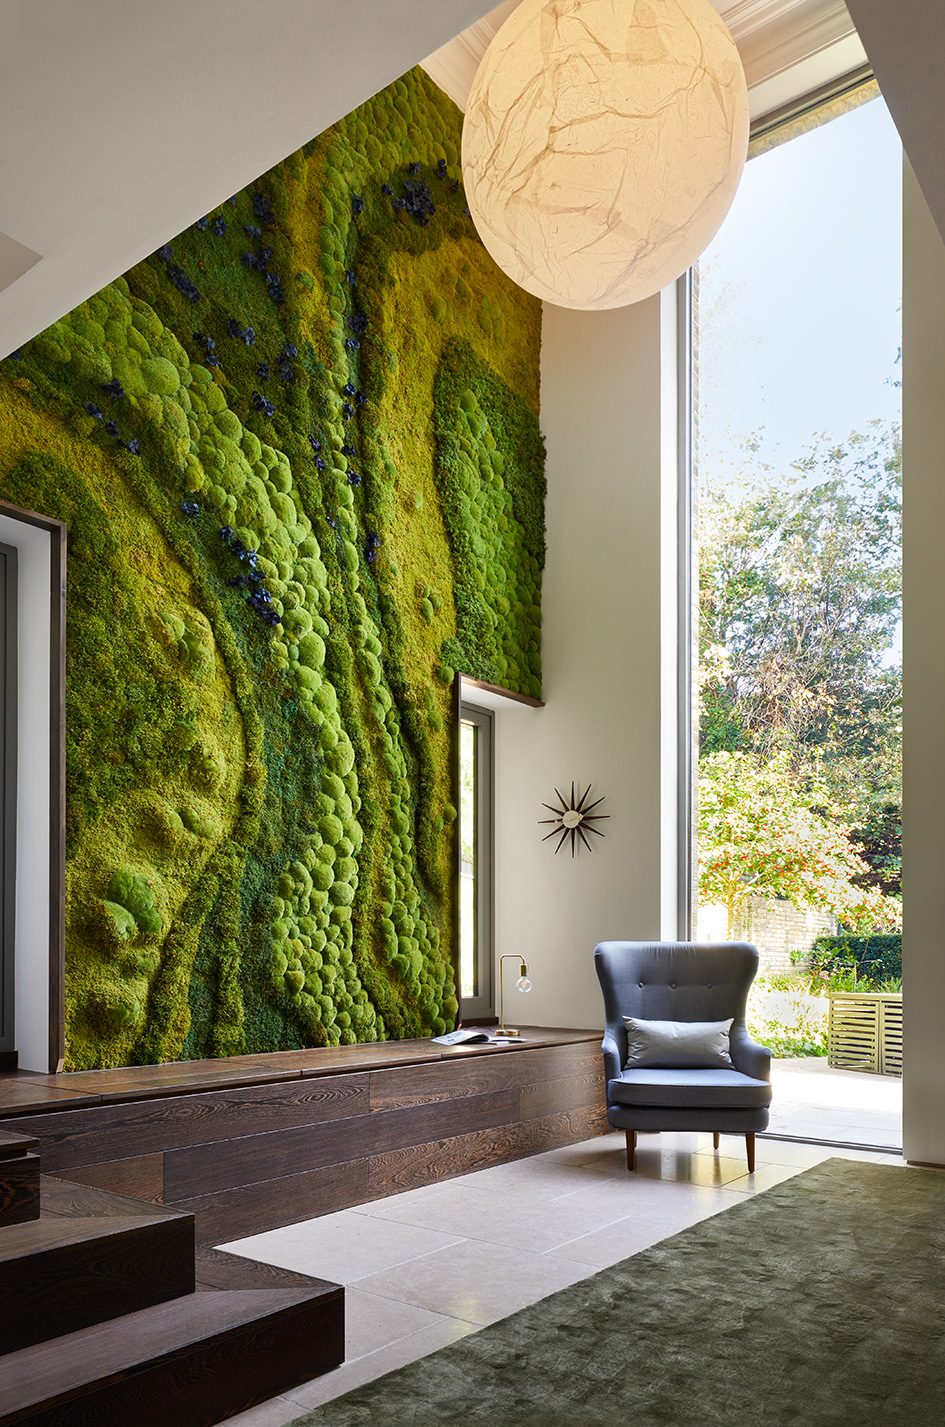 What Is A Moss Wall? (And Why You Should Get One)